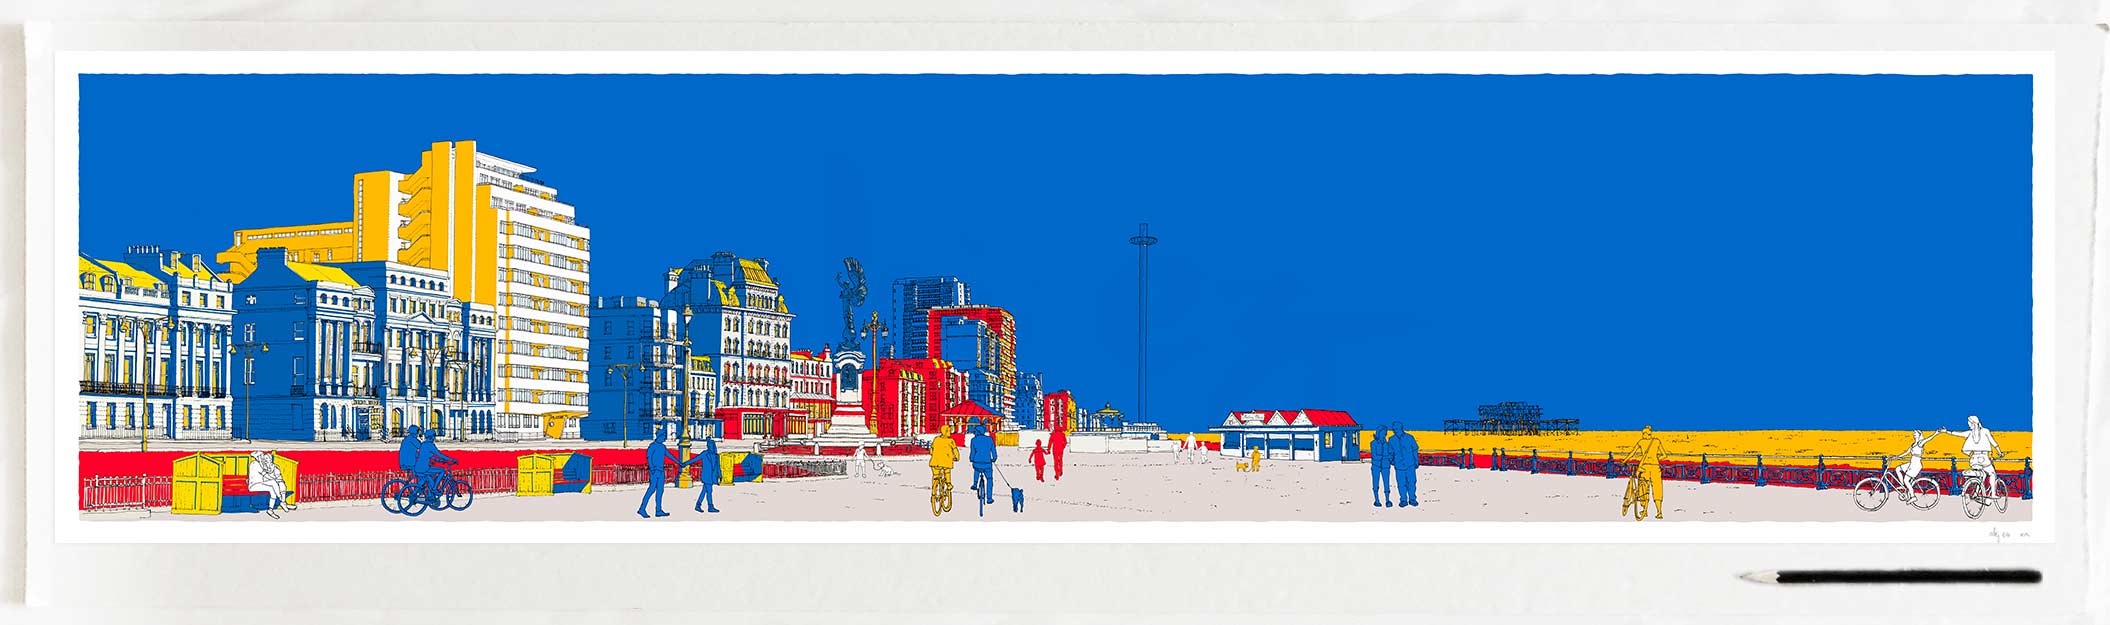 art print by artist alej ez titled Embassy Court Brighton and Hove Seafront Modernist